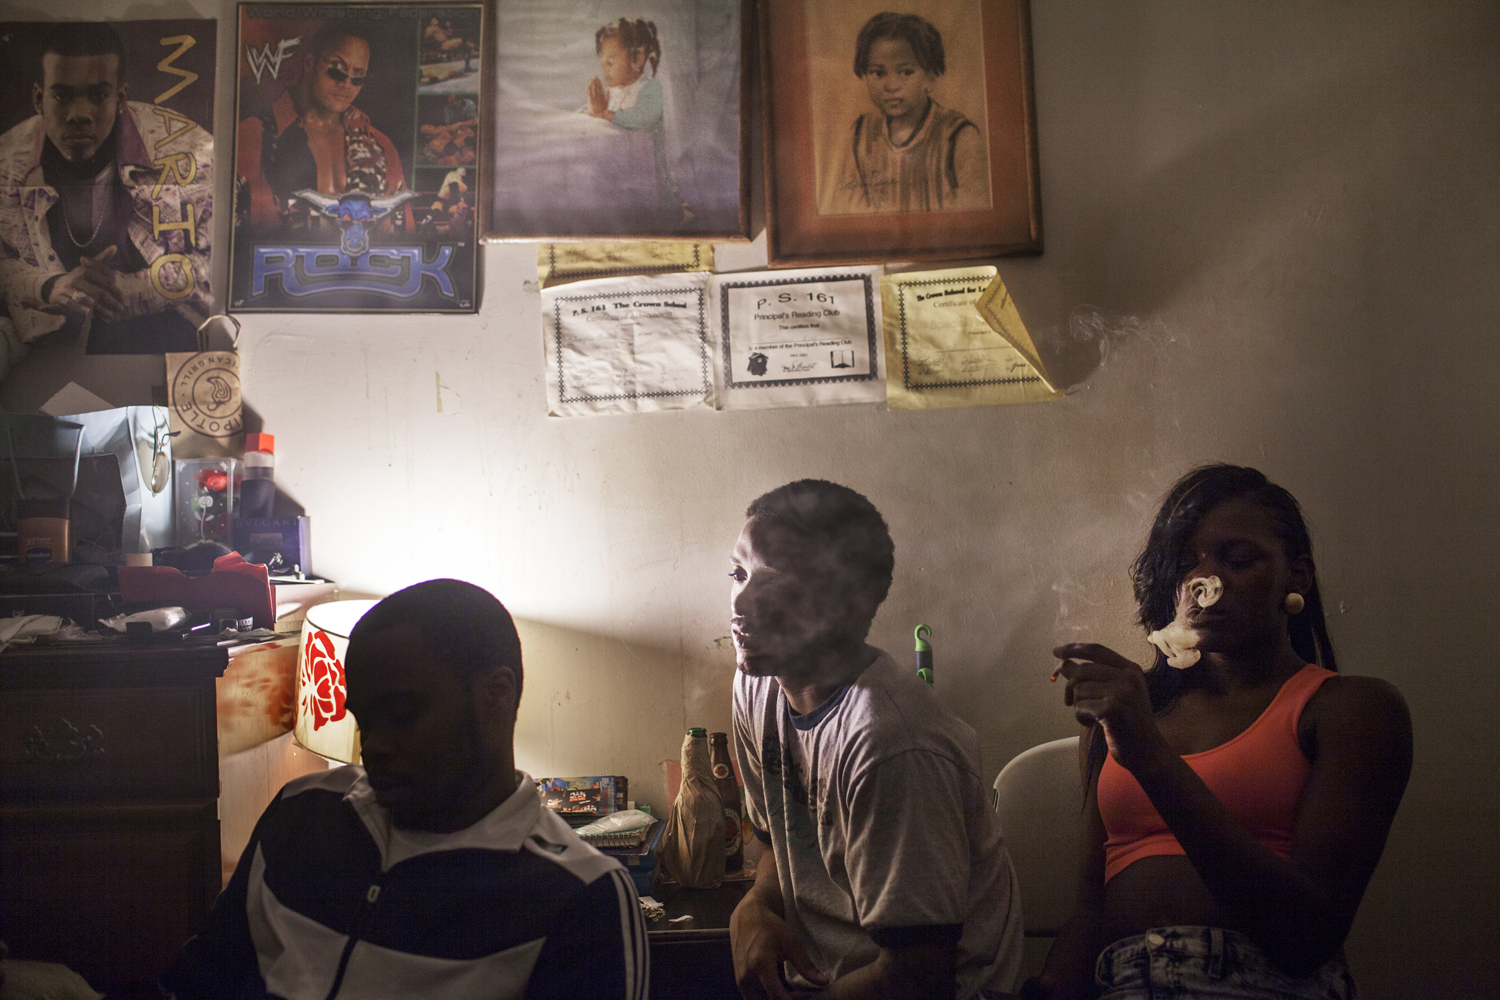 August 19, 2013. Velvet and friends smoke and watch the new Grand Theft Auto game being played in a  friend's bedroom.